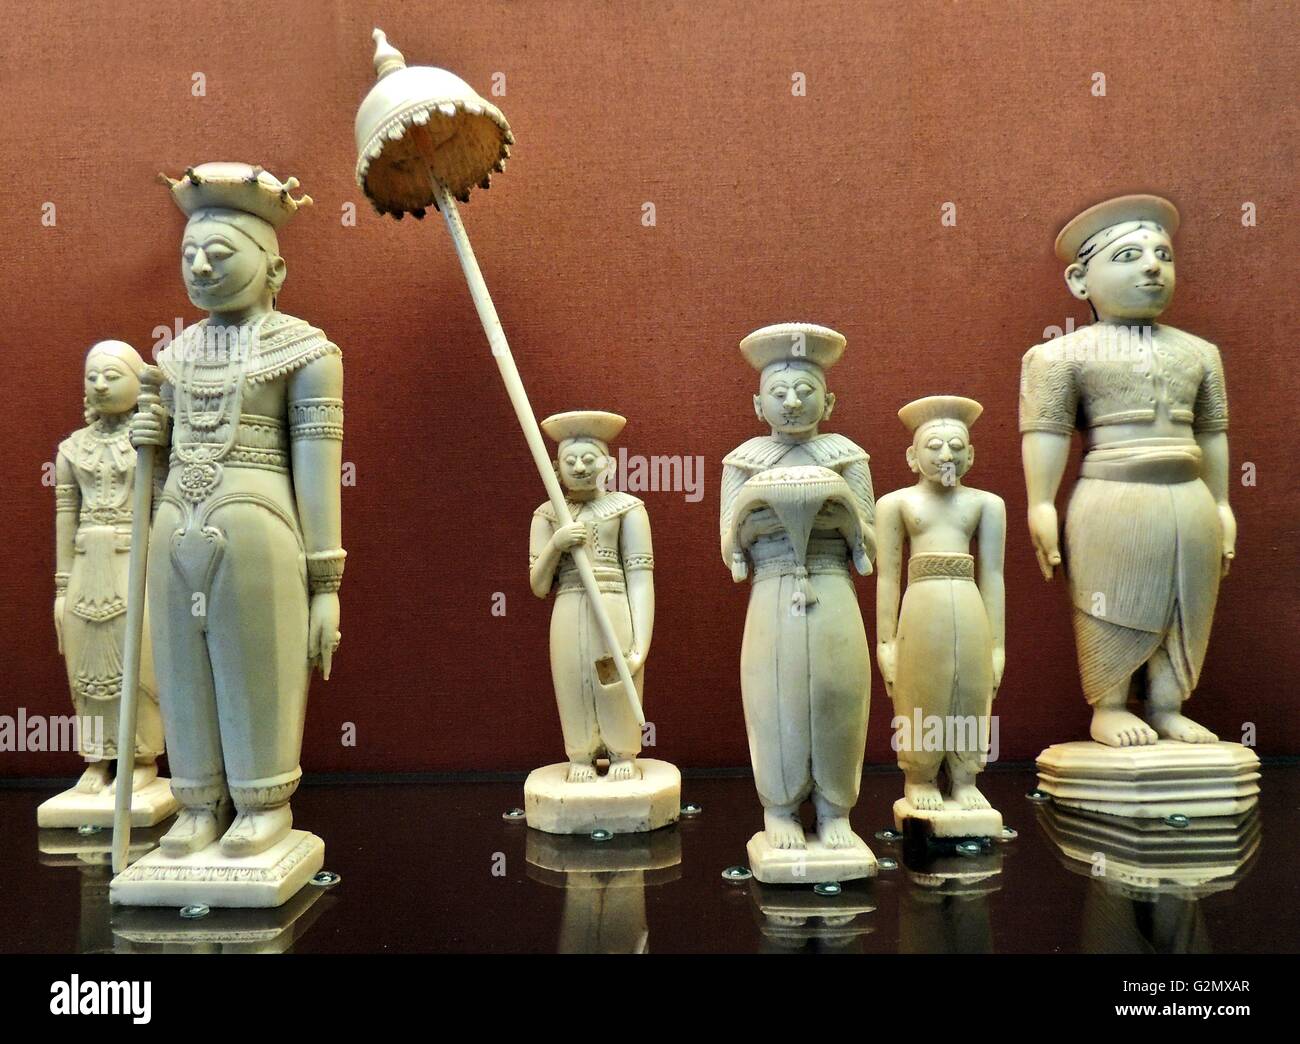 Group of ivory figures from the Kandyan royal family 18th century A.D. Stock Photo